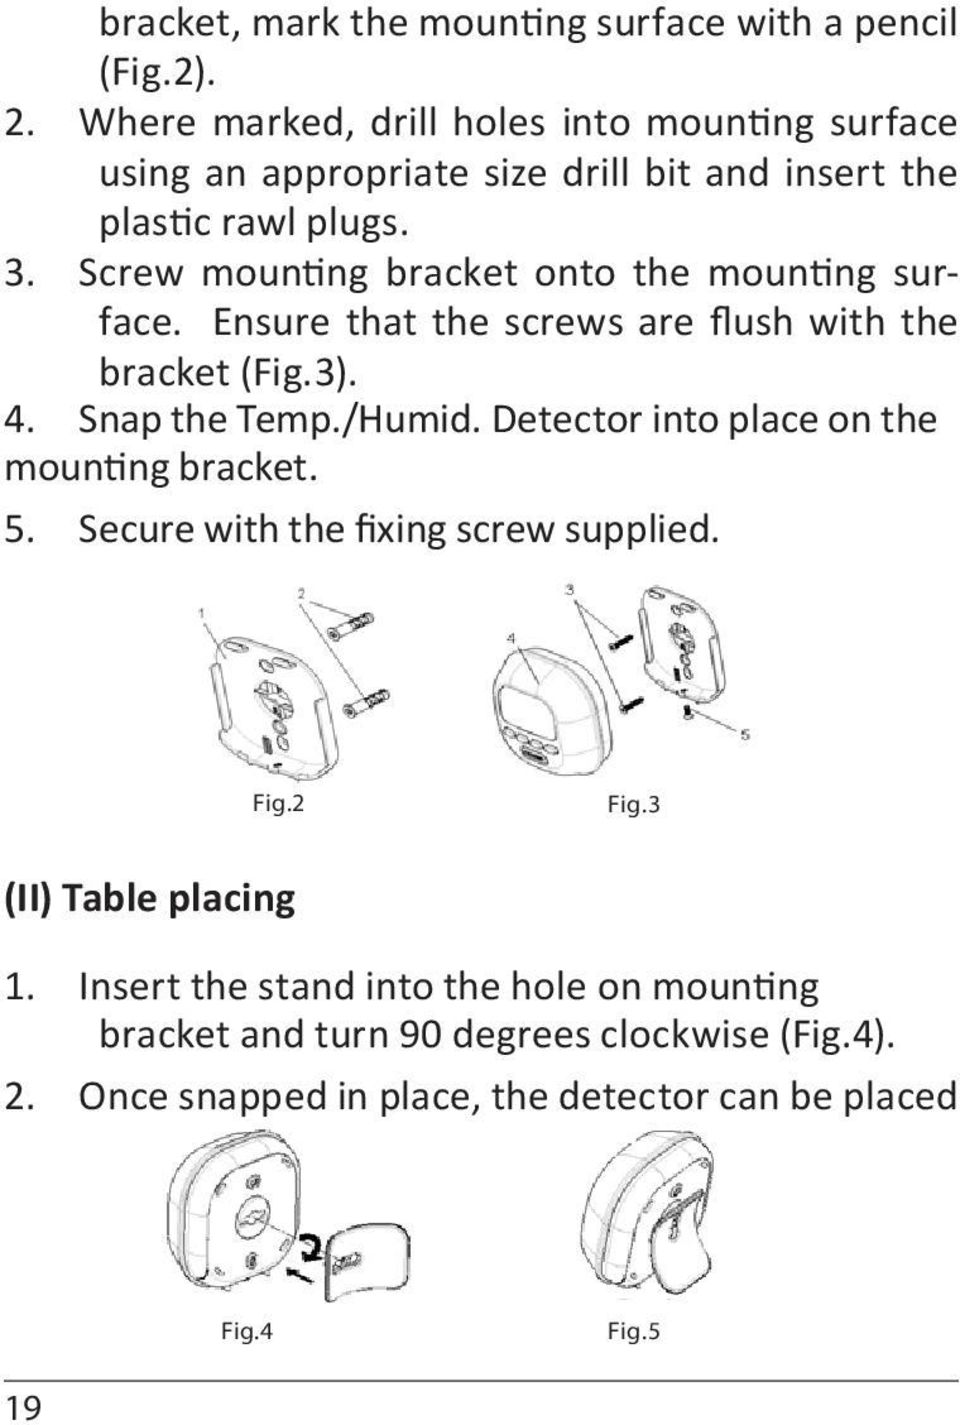 Screw mounting bracket onto the mounting surface. Ensure that the screws are flush with the bracket (Fig.3). 4. Snap the Temp./Humid.